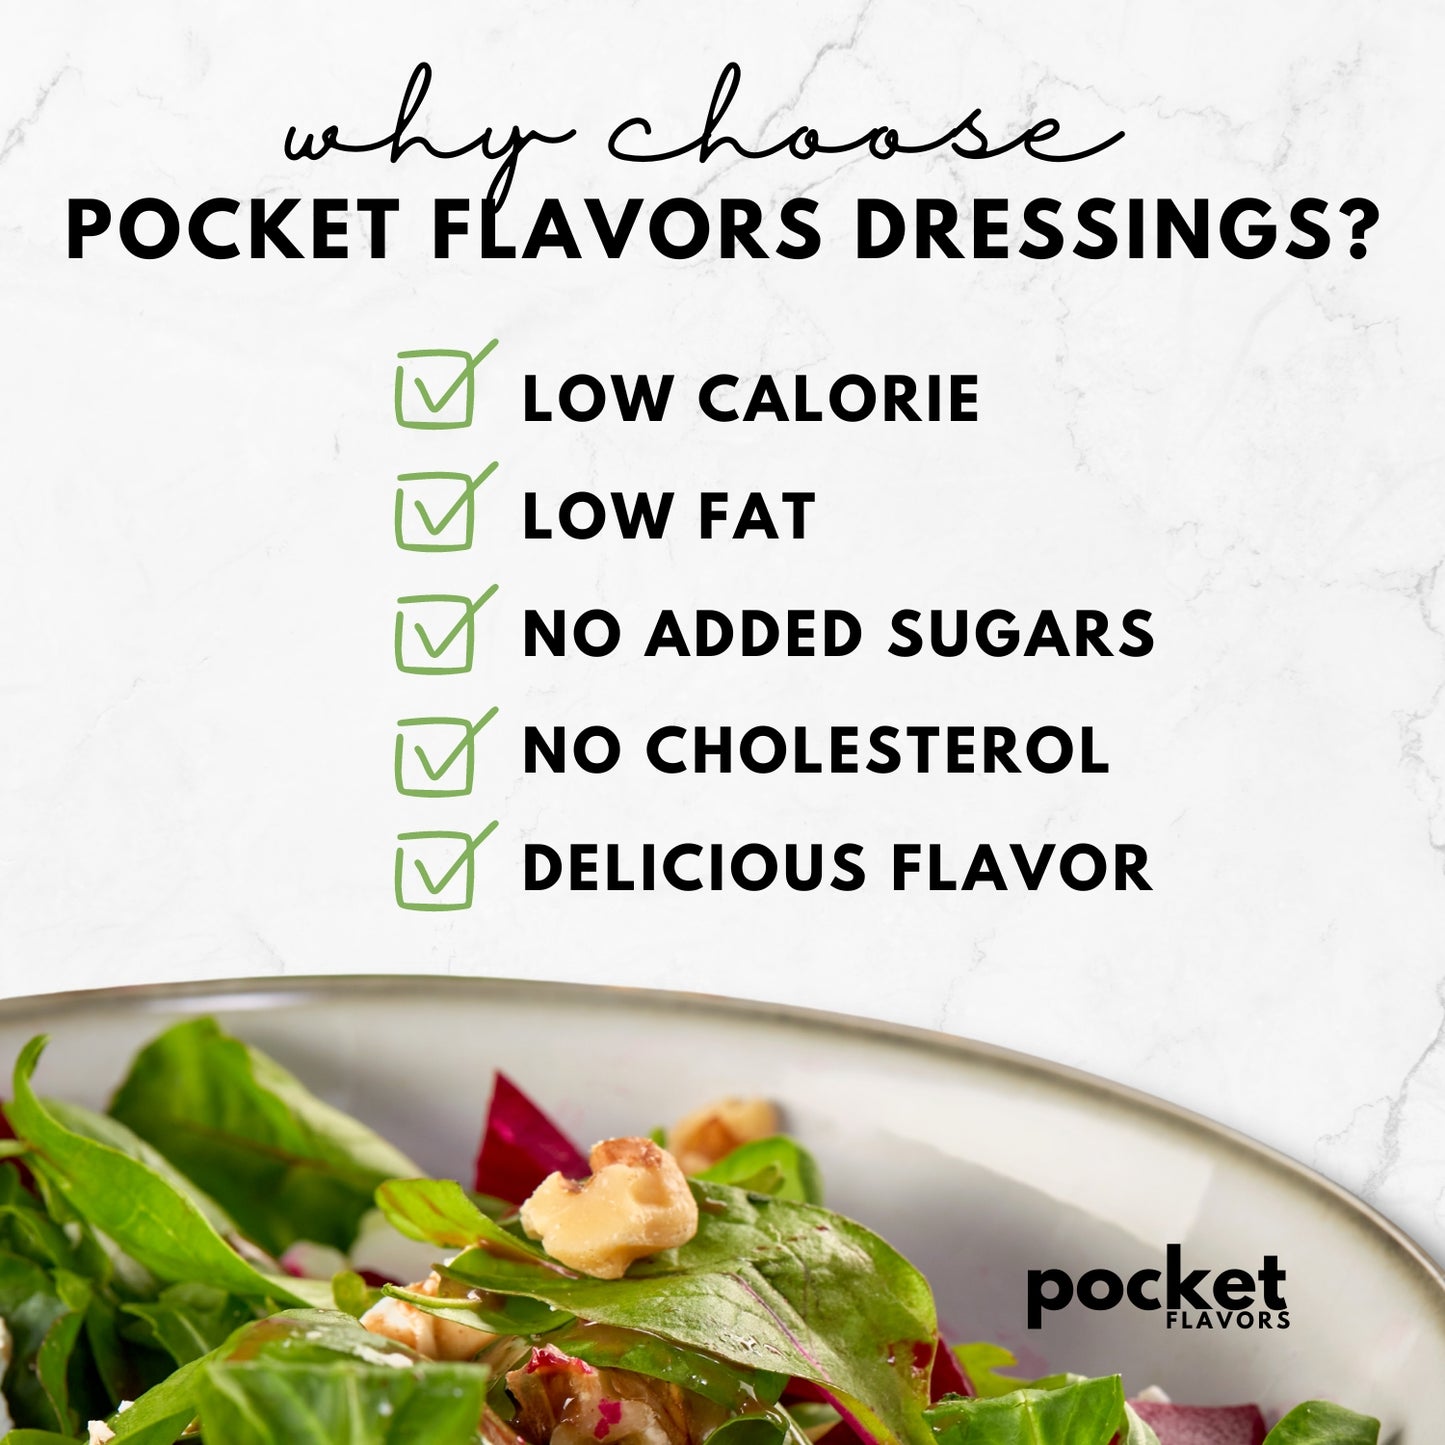 Pocket Flavors nutrition information with no calorie, low fat, no added sugars, no cholesterol, and delicious flavor. 